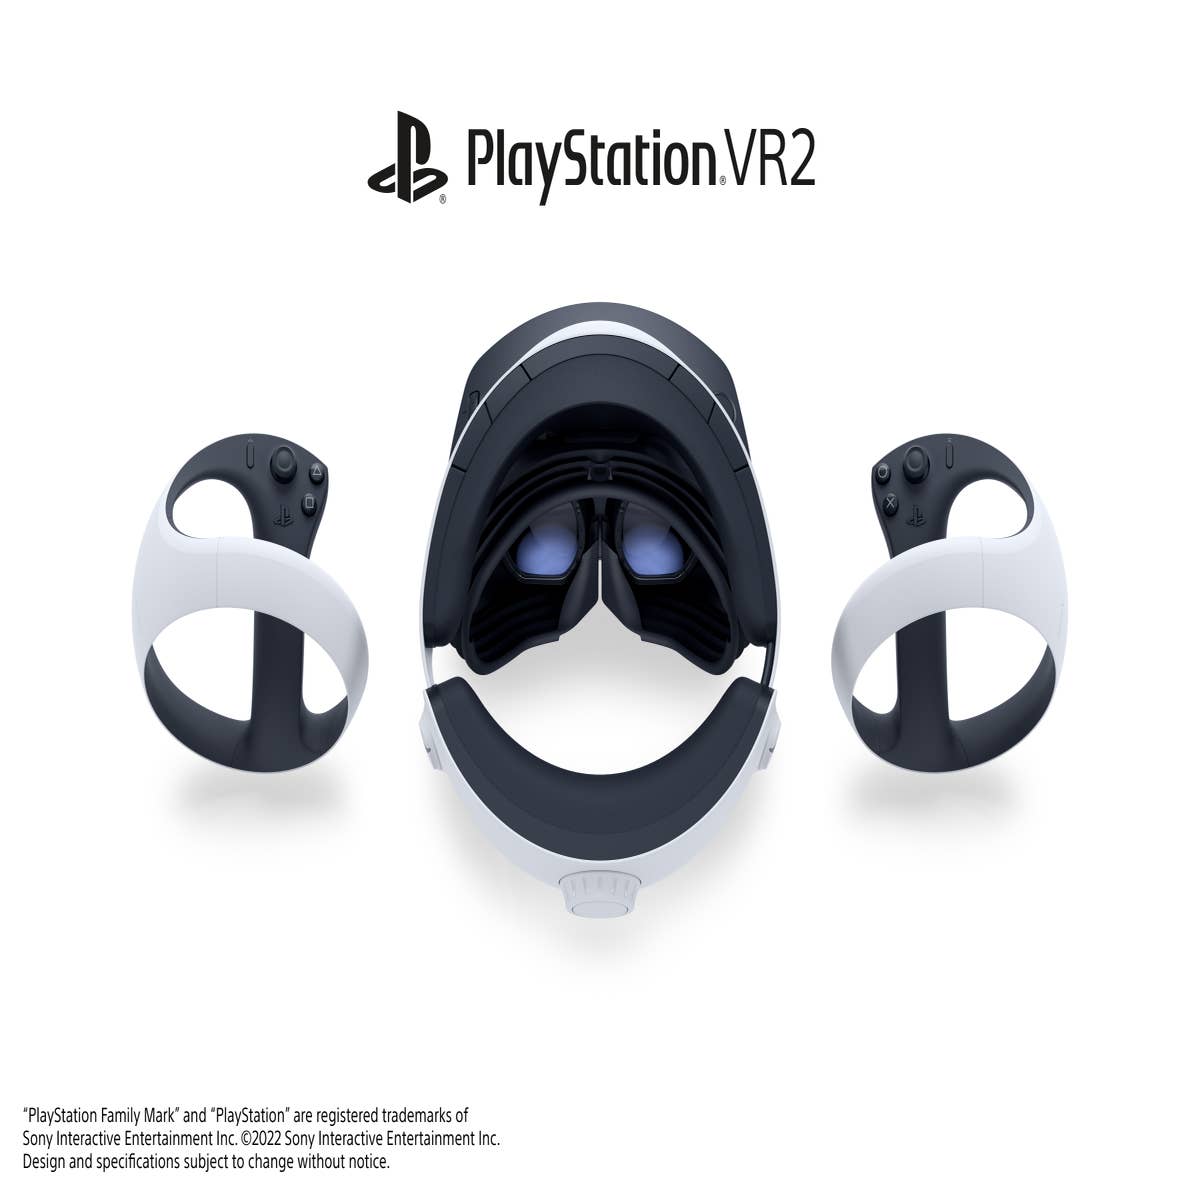 PlayStation VR2 Review: Is This PSVR Headset Worth Its Price Long-Term?